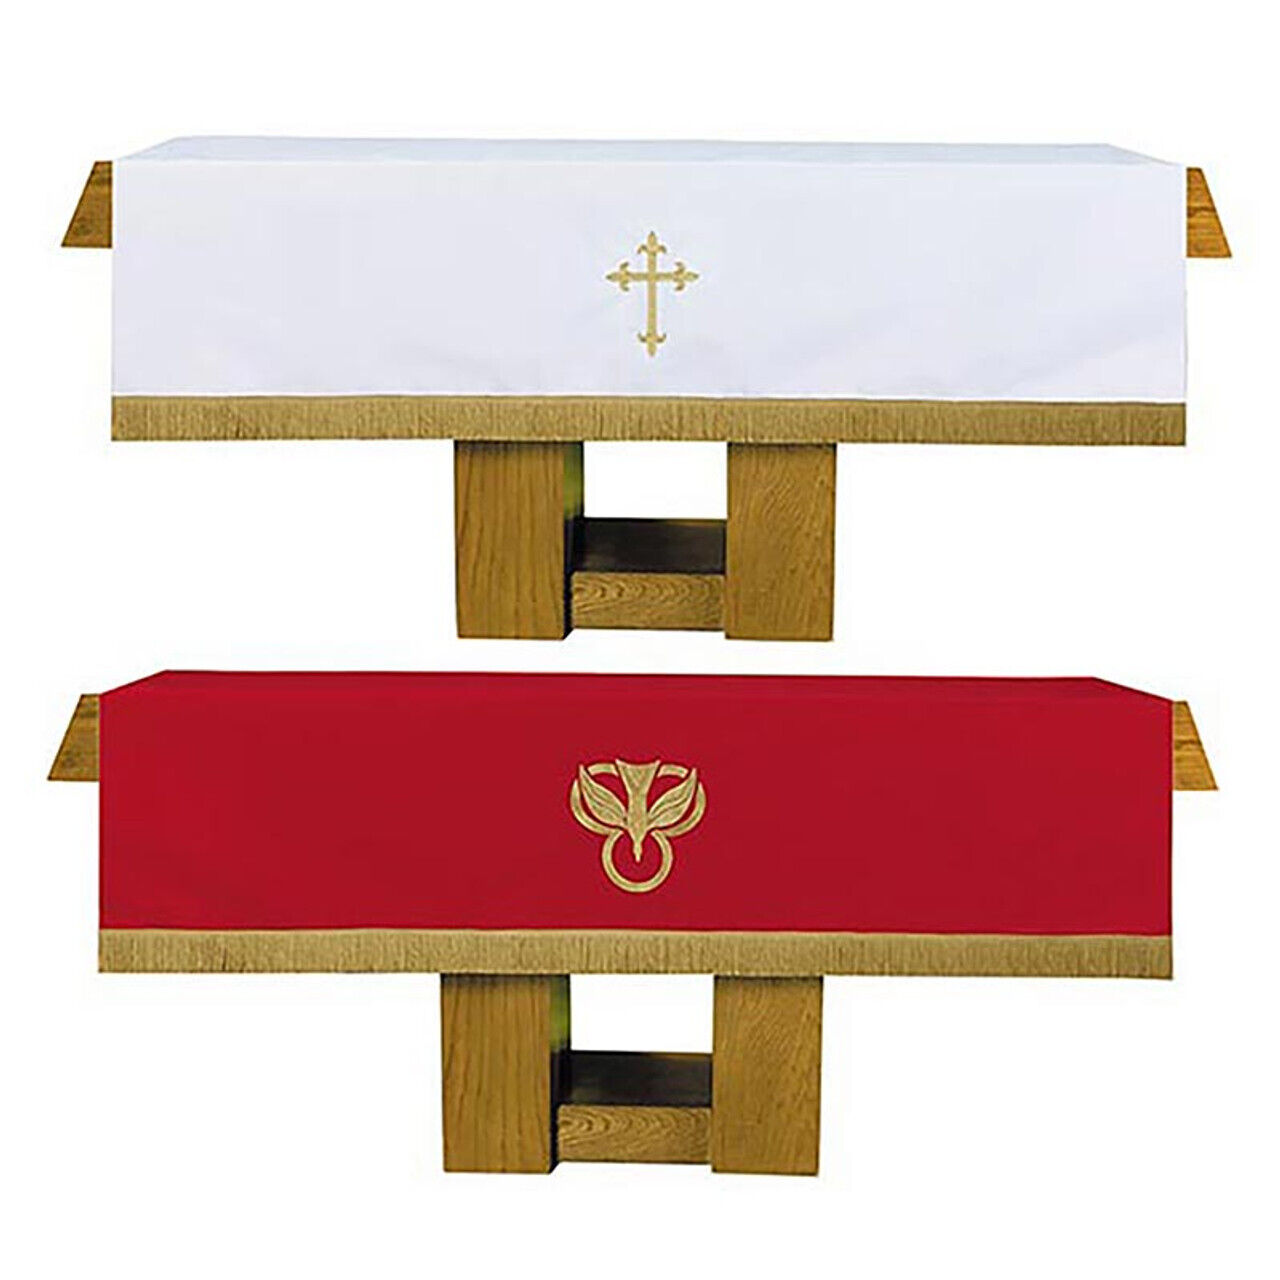 Reversible Altar Frontal Clergy Vestments Red and White 72x52 Inch Dove Cross